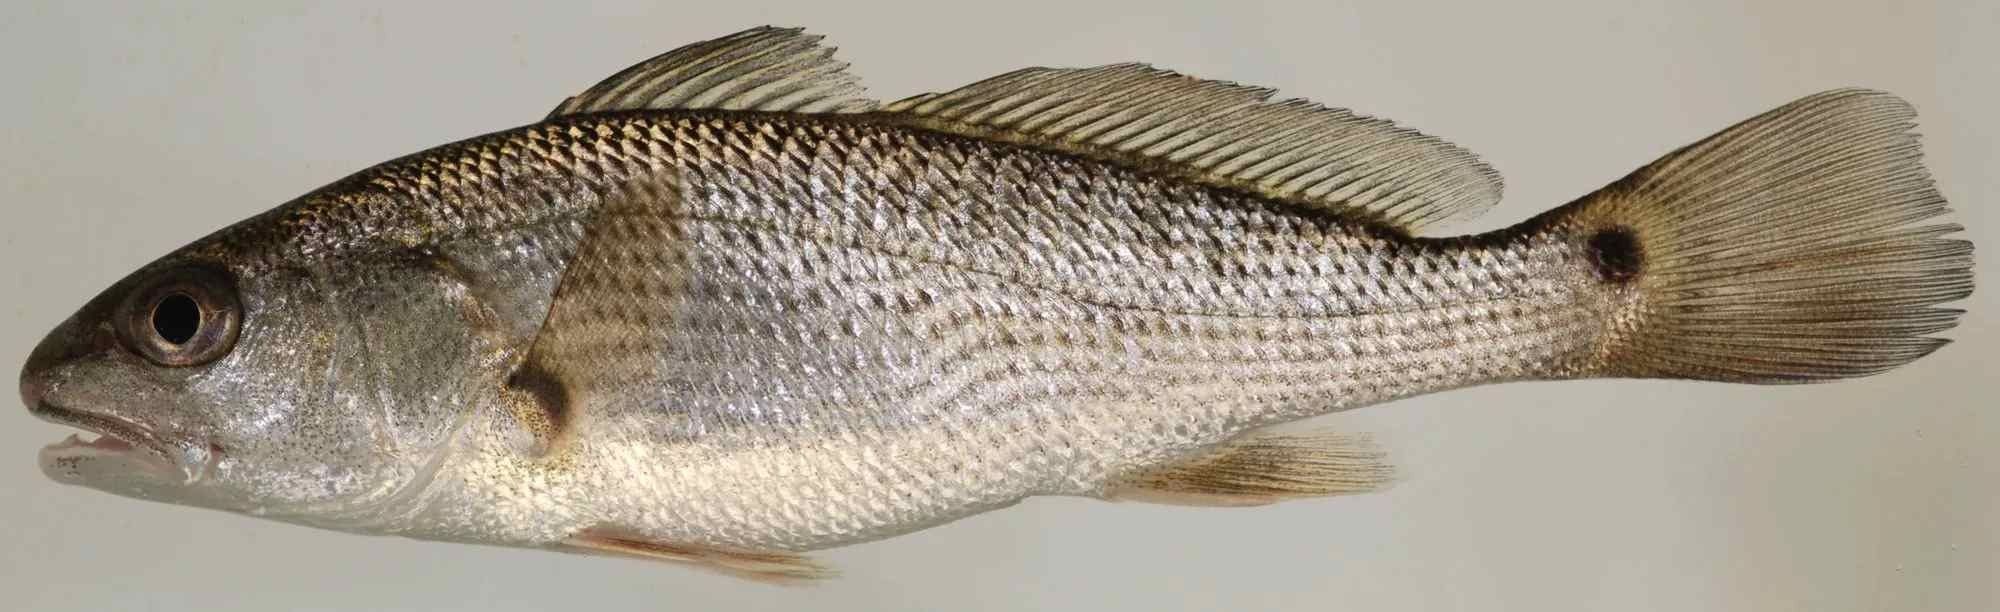 Find out about the characteristics and habitat of the Red Drum fish.